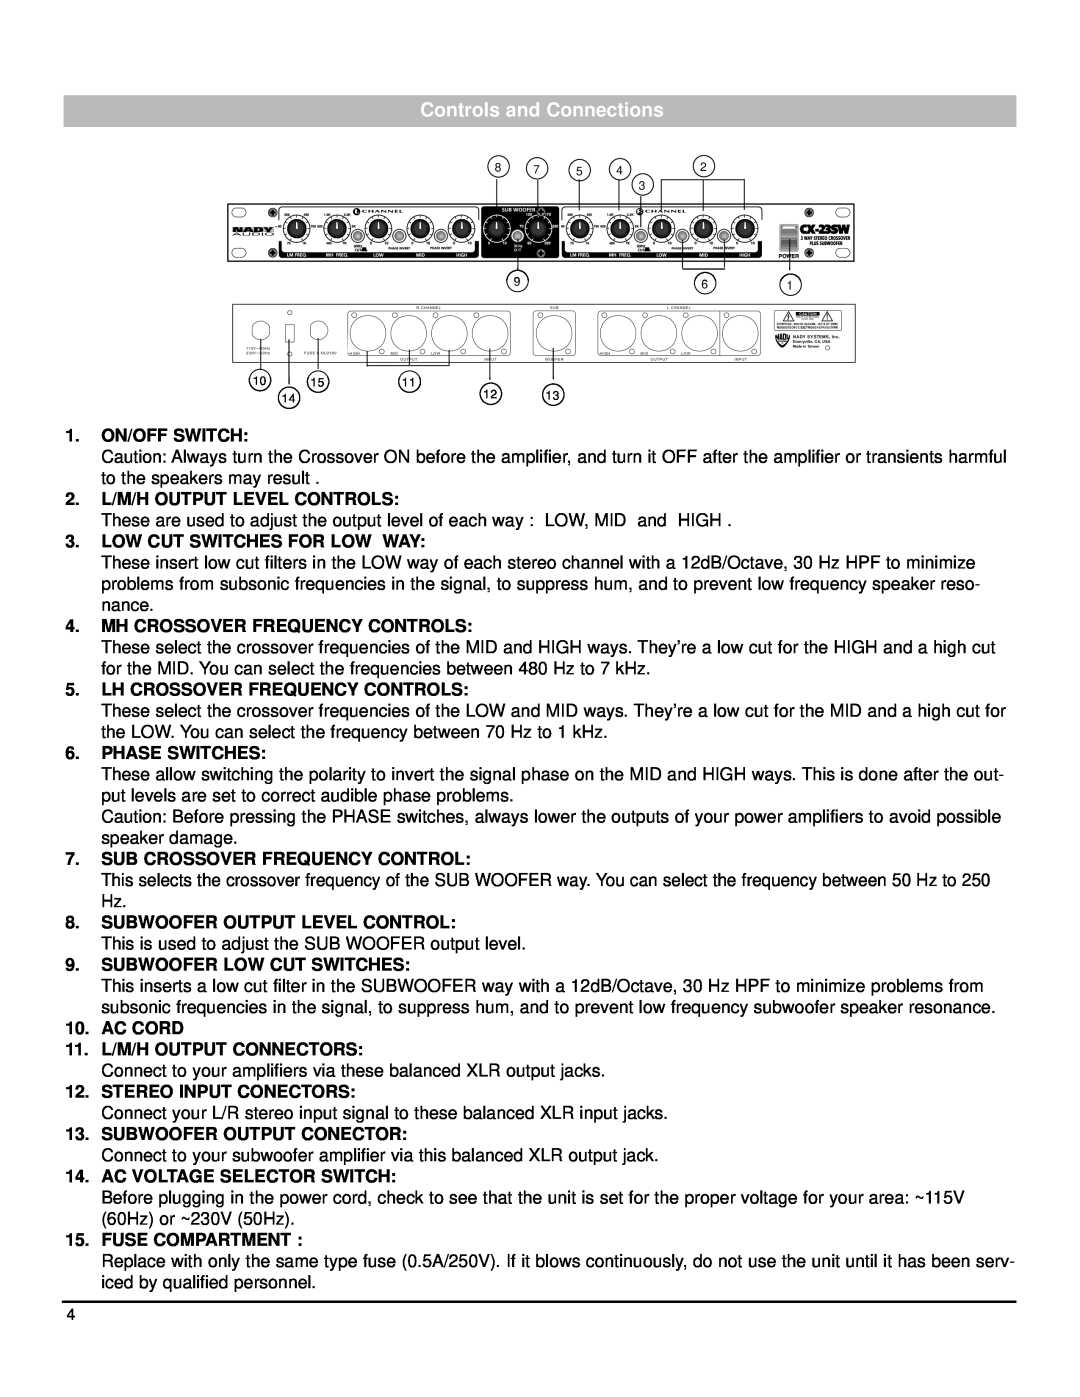 Nady Systems CX-23SW owner manual Controls and Connections 